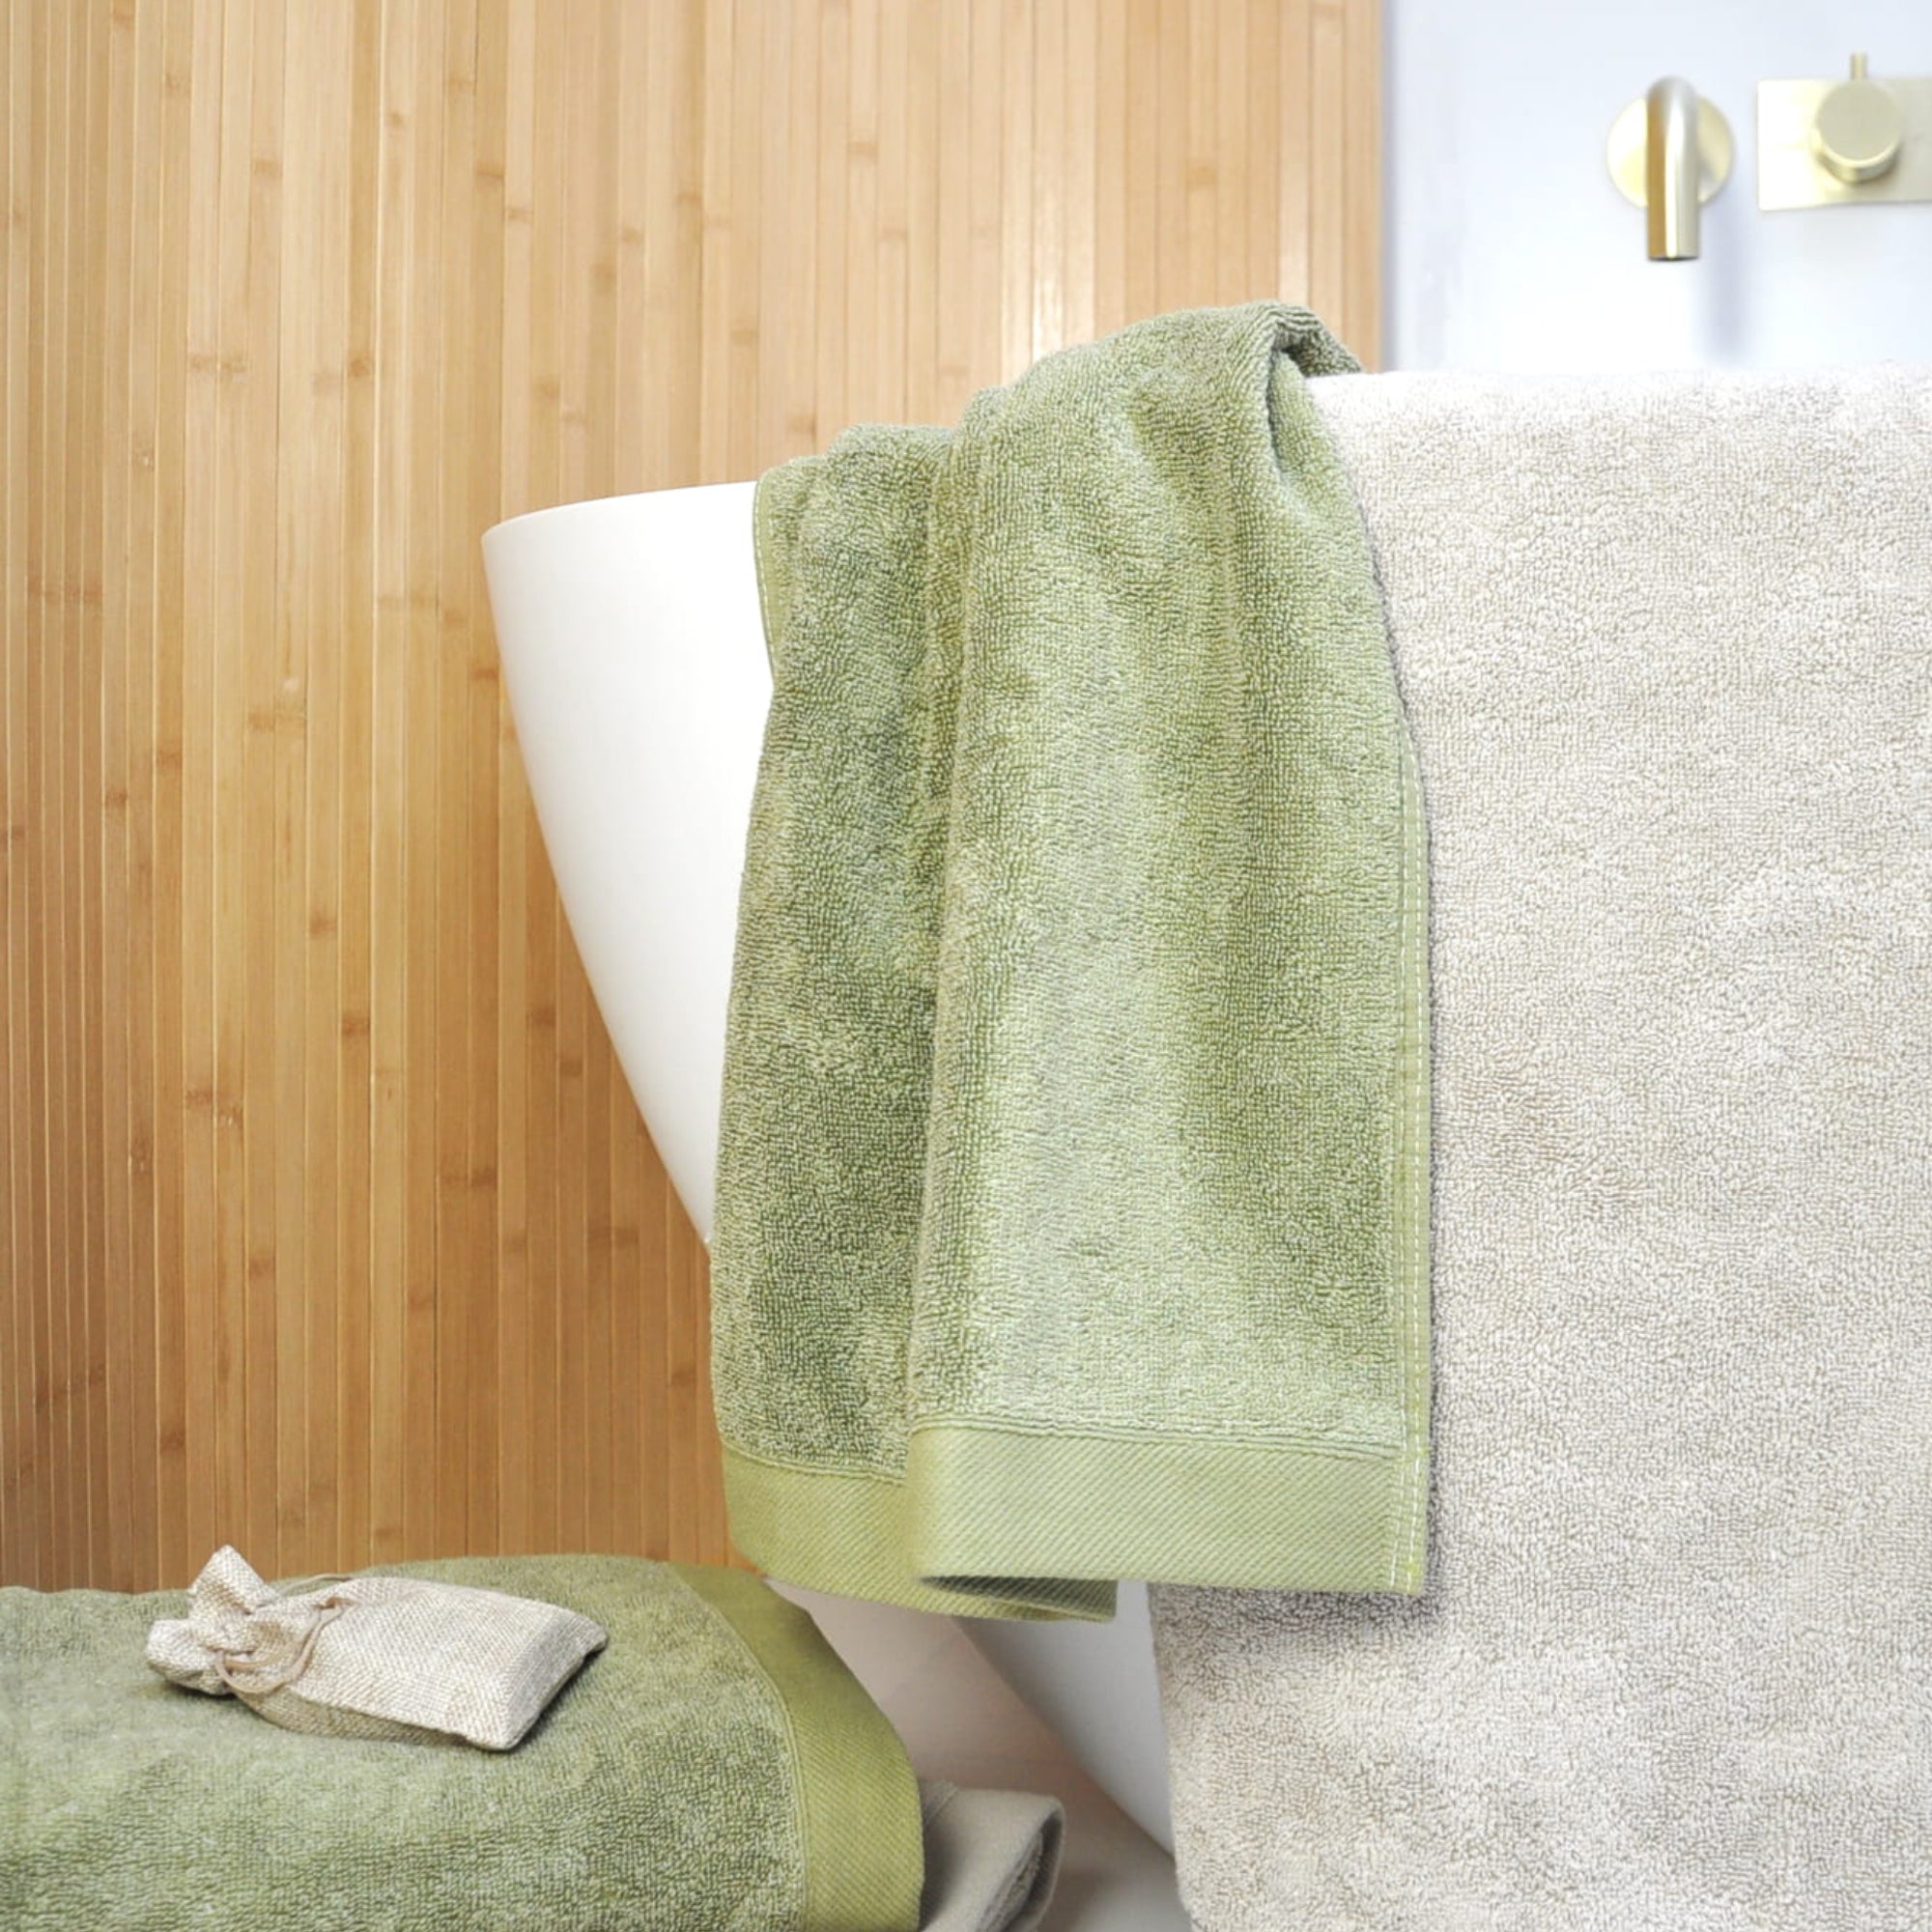 Abode Eco Towels and Bath Sheets by Drift Home in Khaki